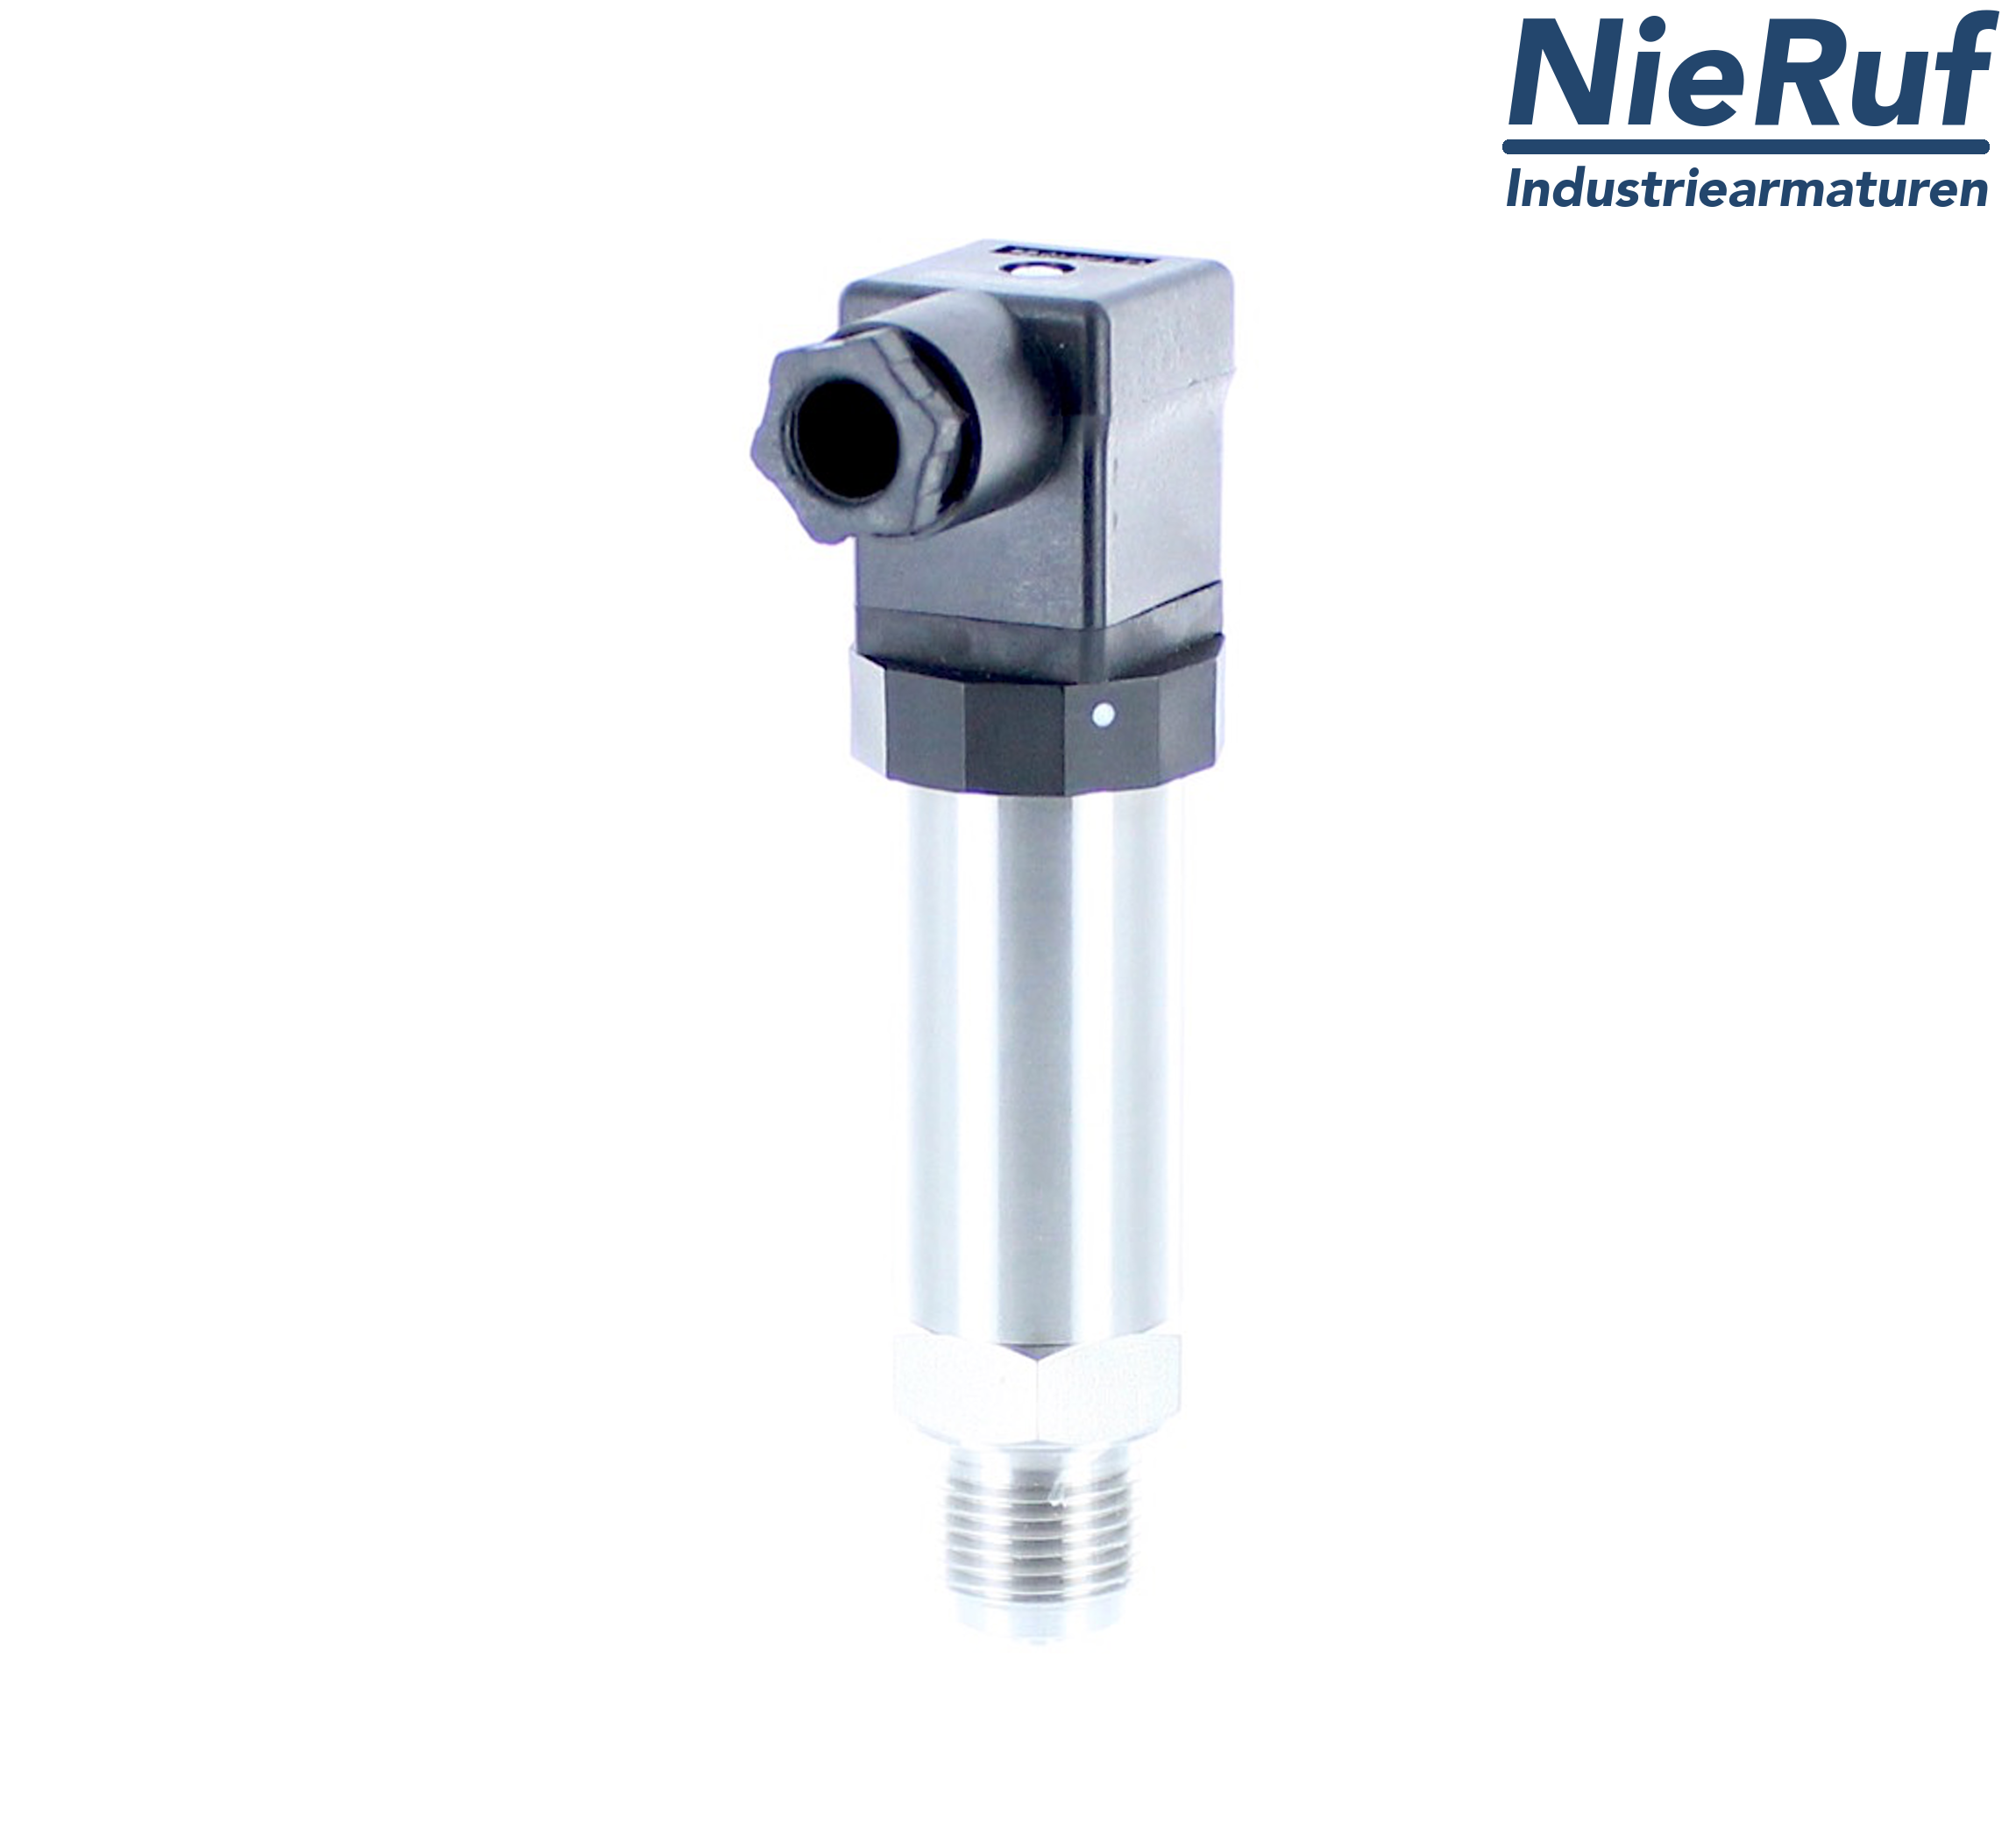 pressure sensor G 1/4" B DS01 stainless steel 2-wire: 4-20mA FPM 0,0 - 160,0 bar